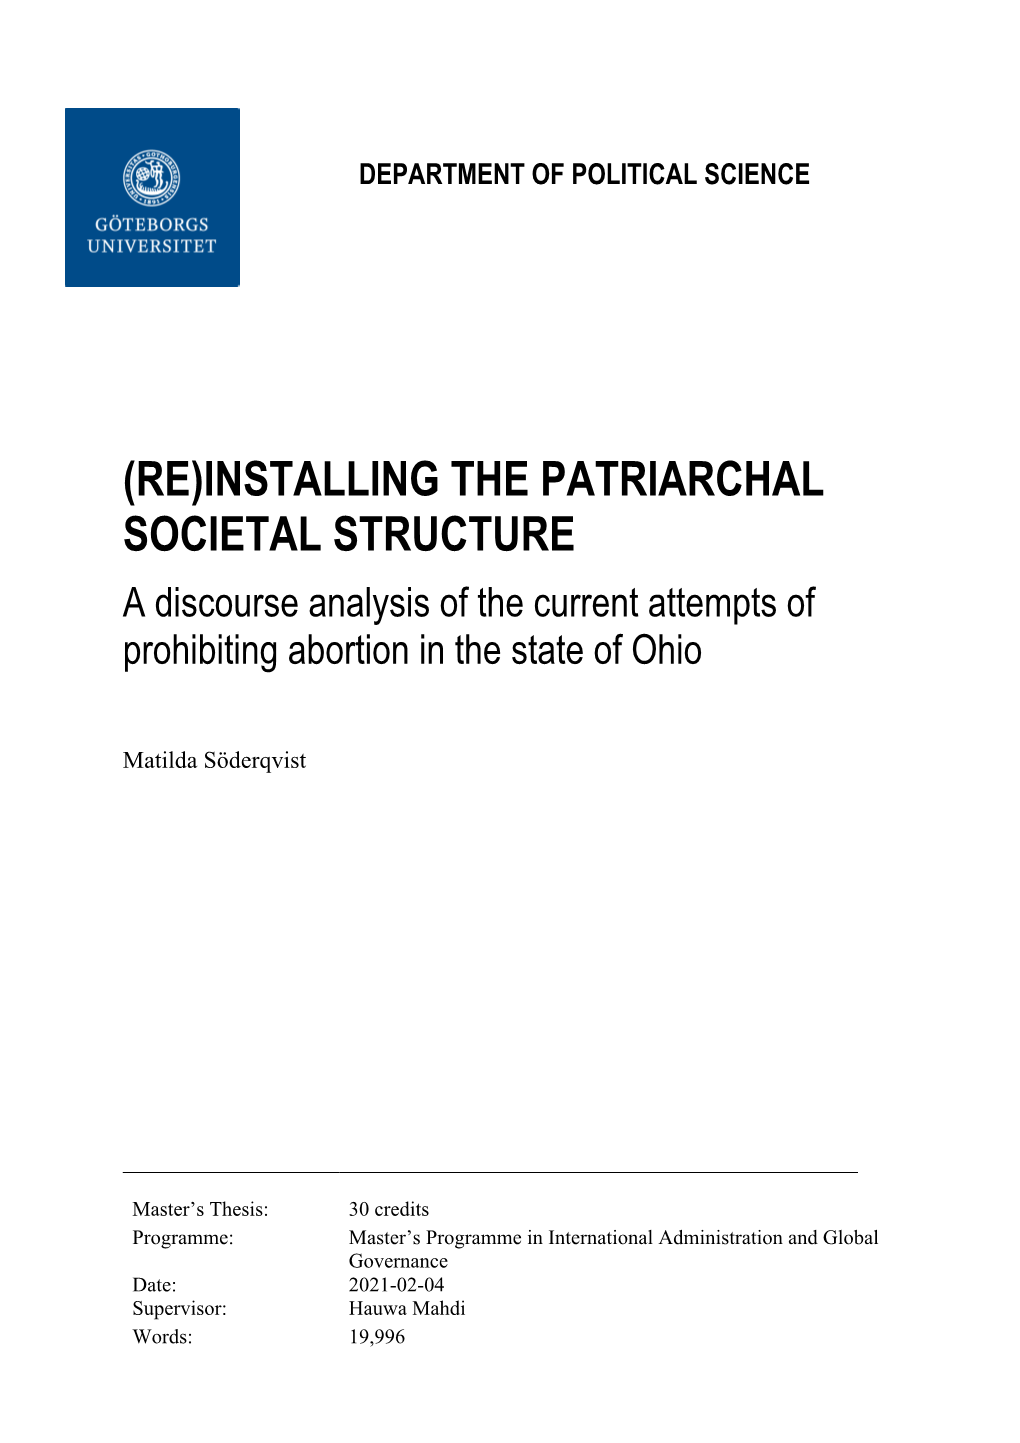 INSTALLING the PATRIARCHAL SOCIETAL STRUCTURE a Discourse Analysis of the Current Attempts of Prohibiting Abortion in the State of Ohio